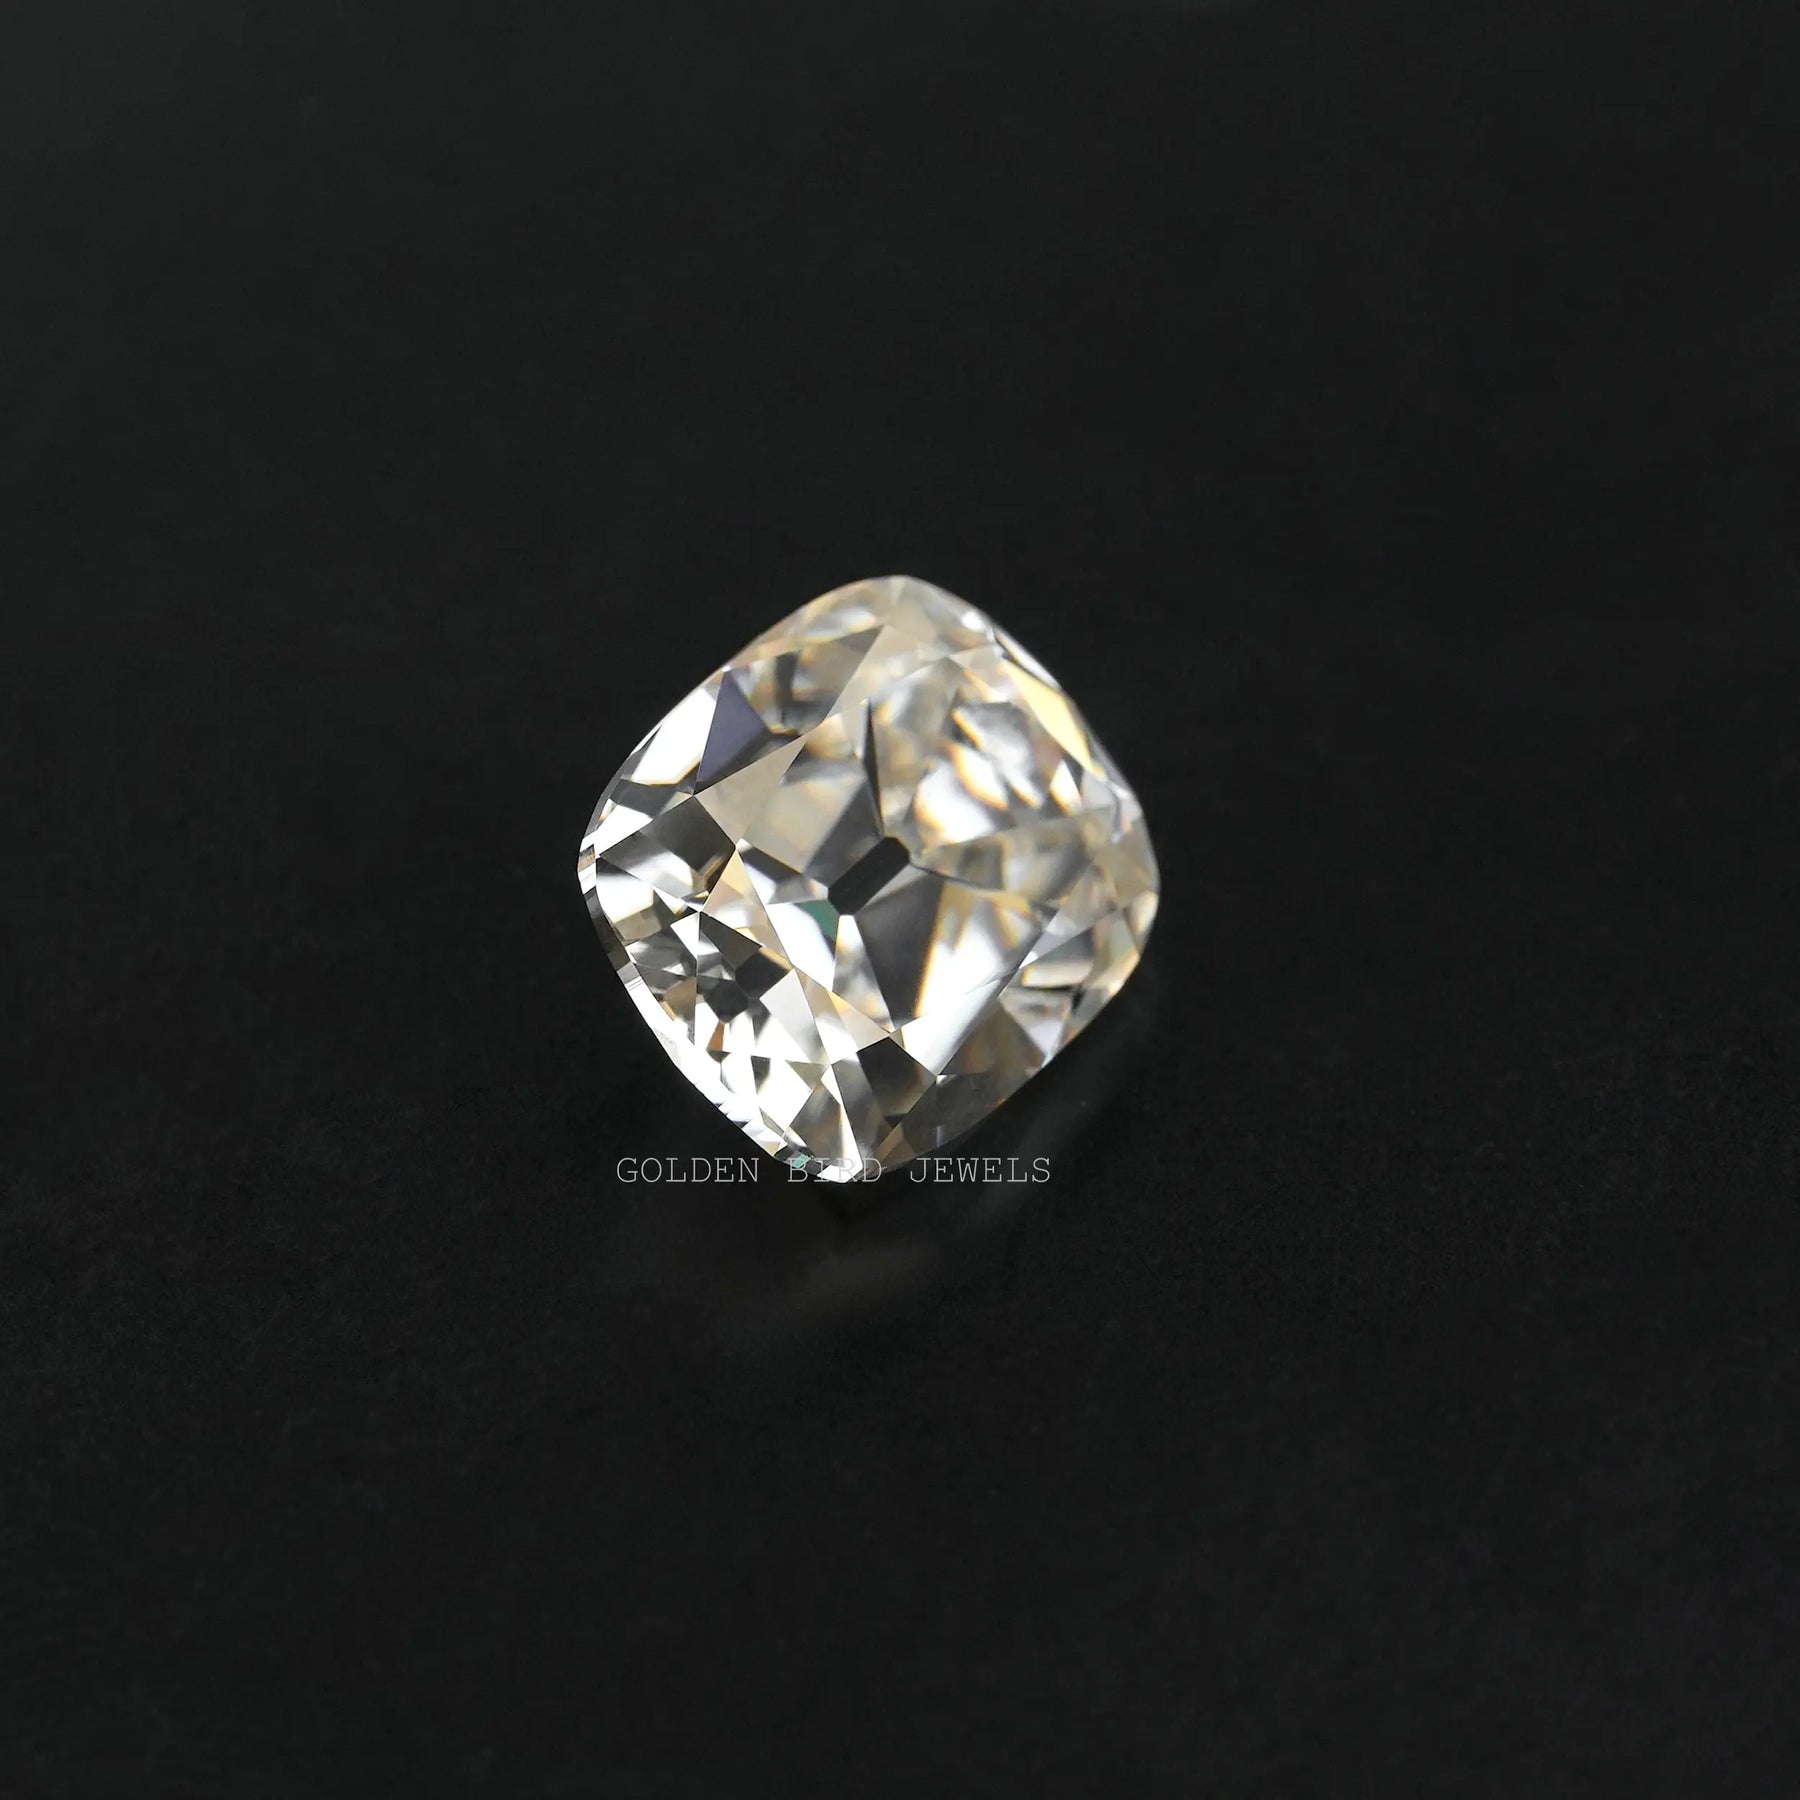 side look of cushion cut refers to the shape of the stone, with rounded corners and a slightly curved top